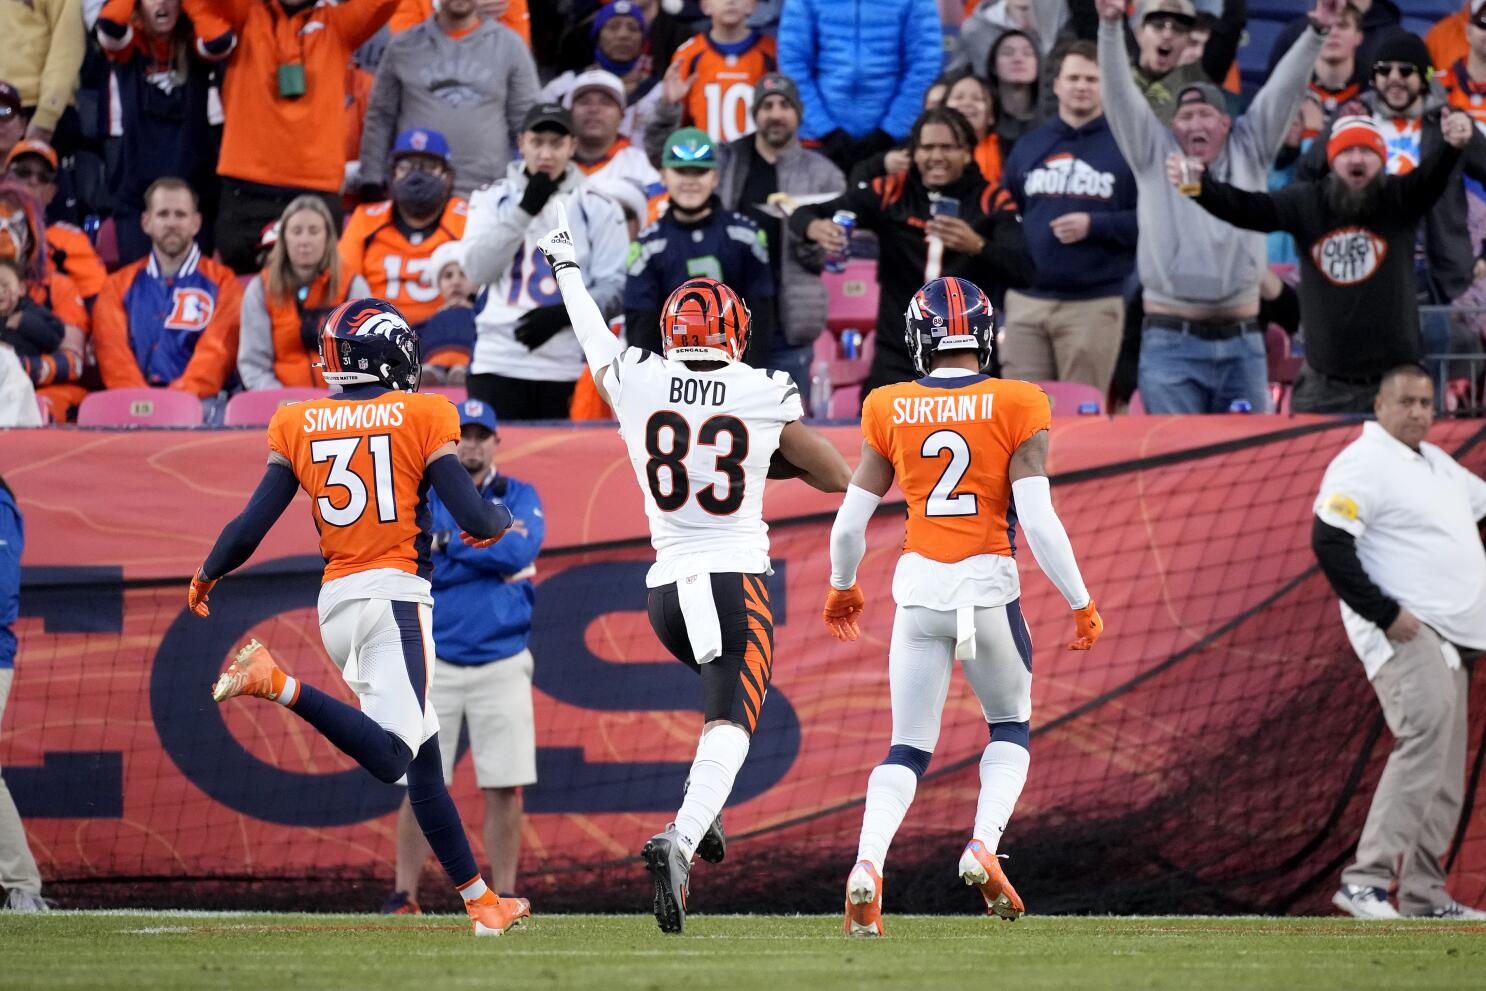 Evan McPherson breaks Bengals' record with 58-yard field goal